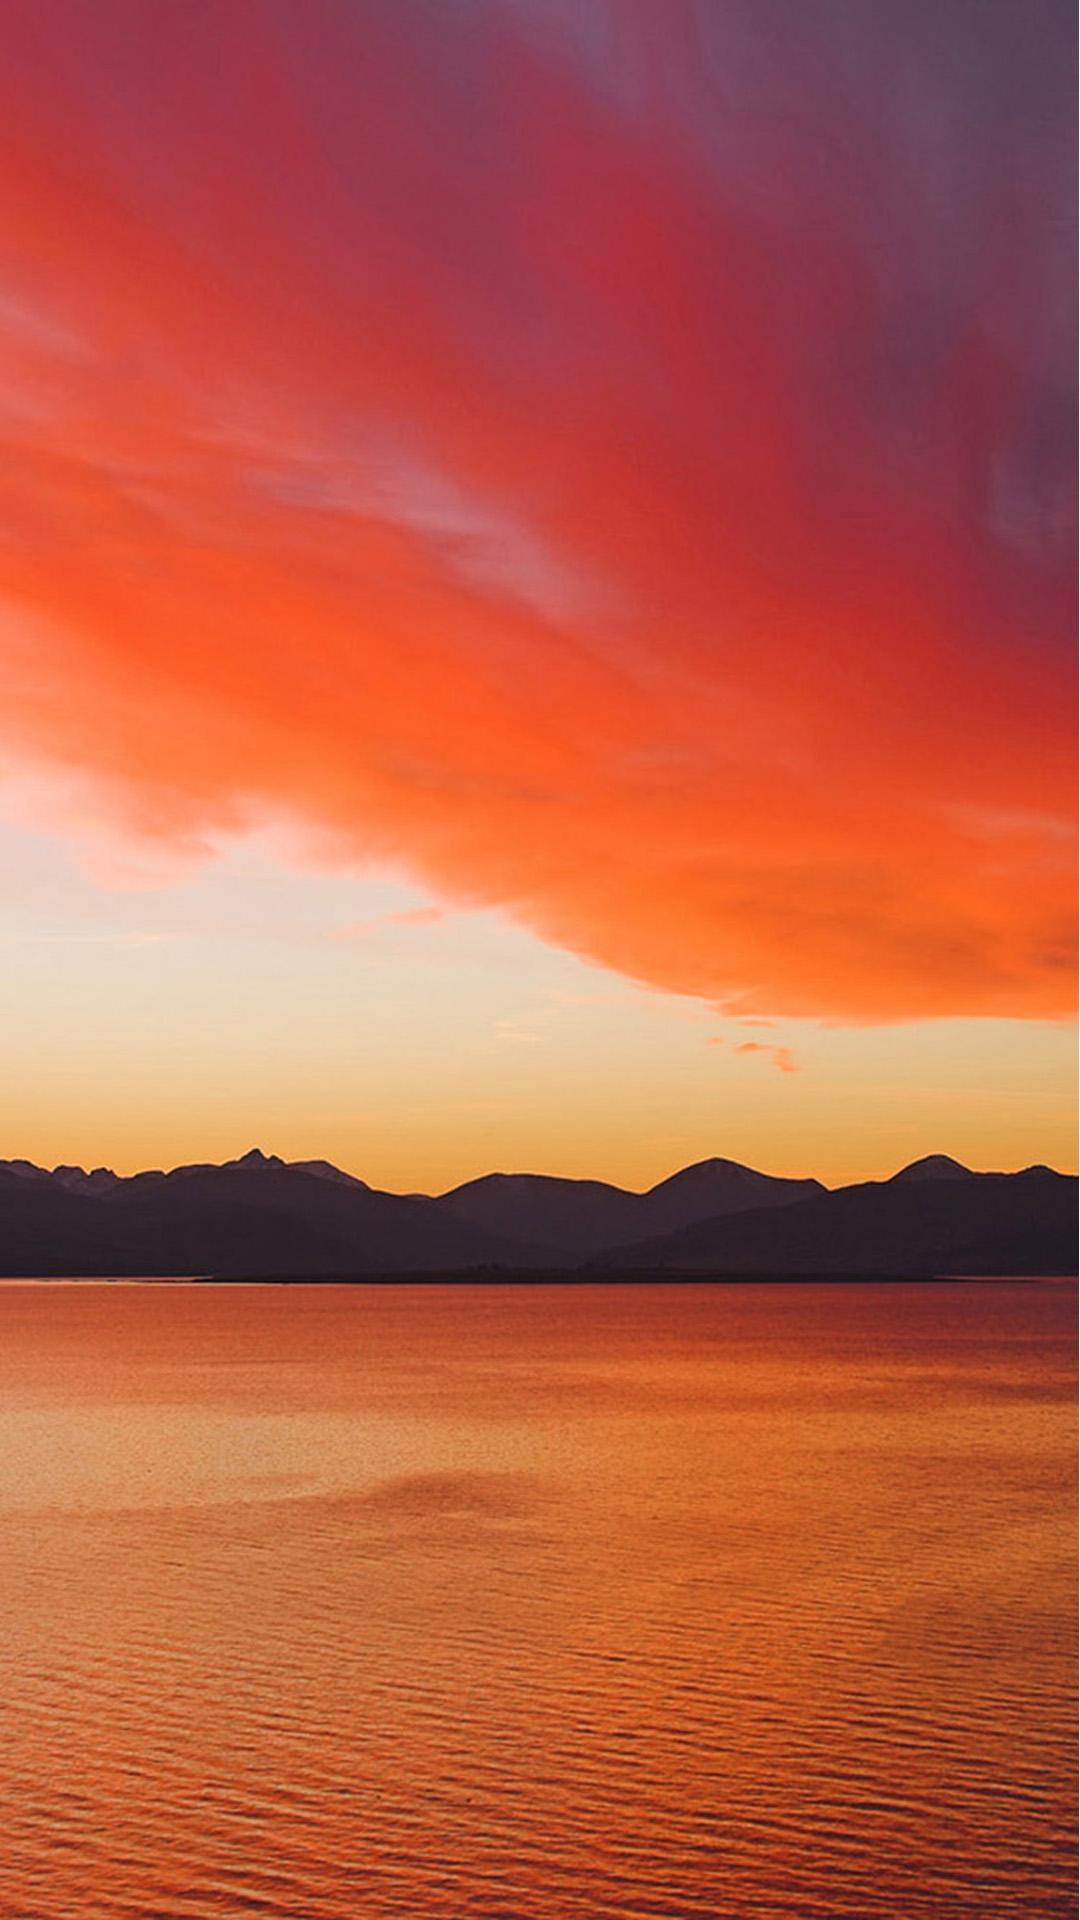 Sunset over the Cuillin Mountains on the Isle of Skye from Kyle